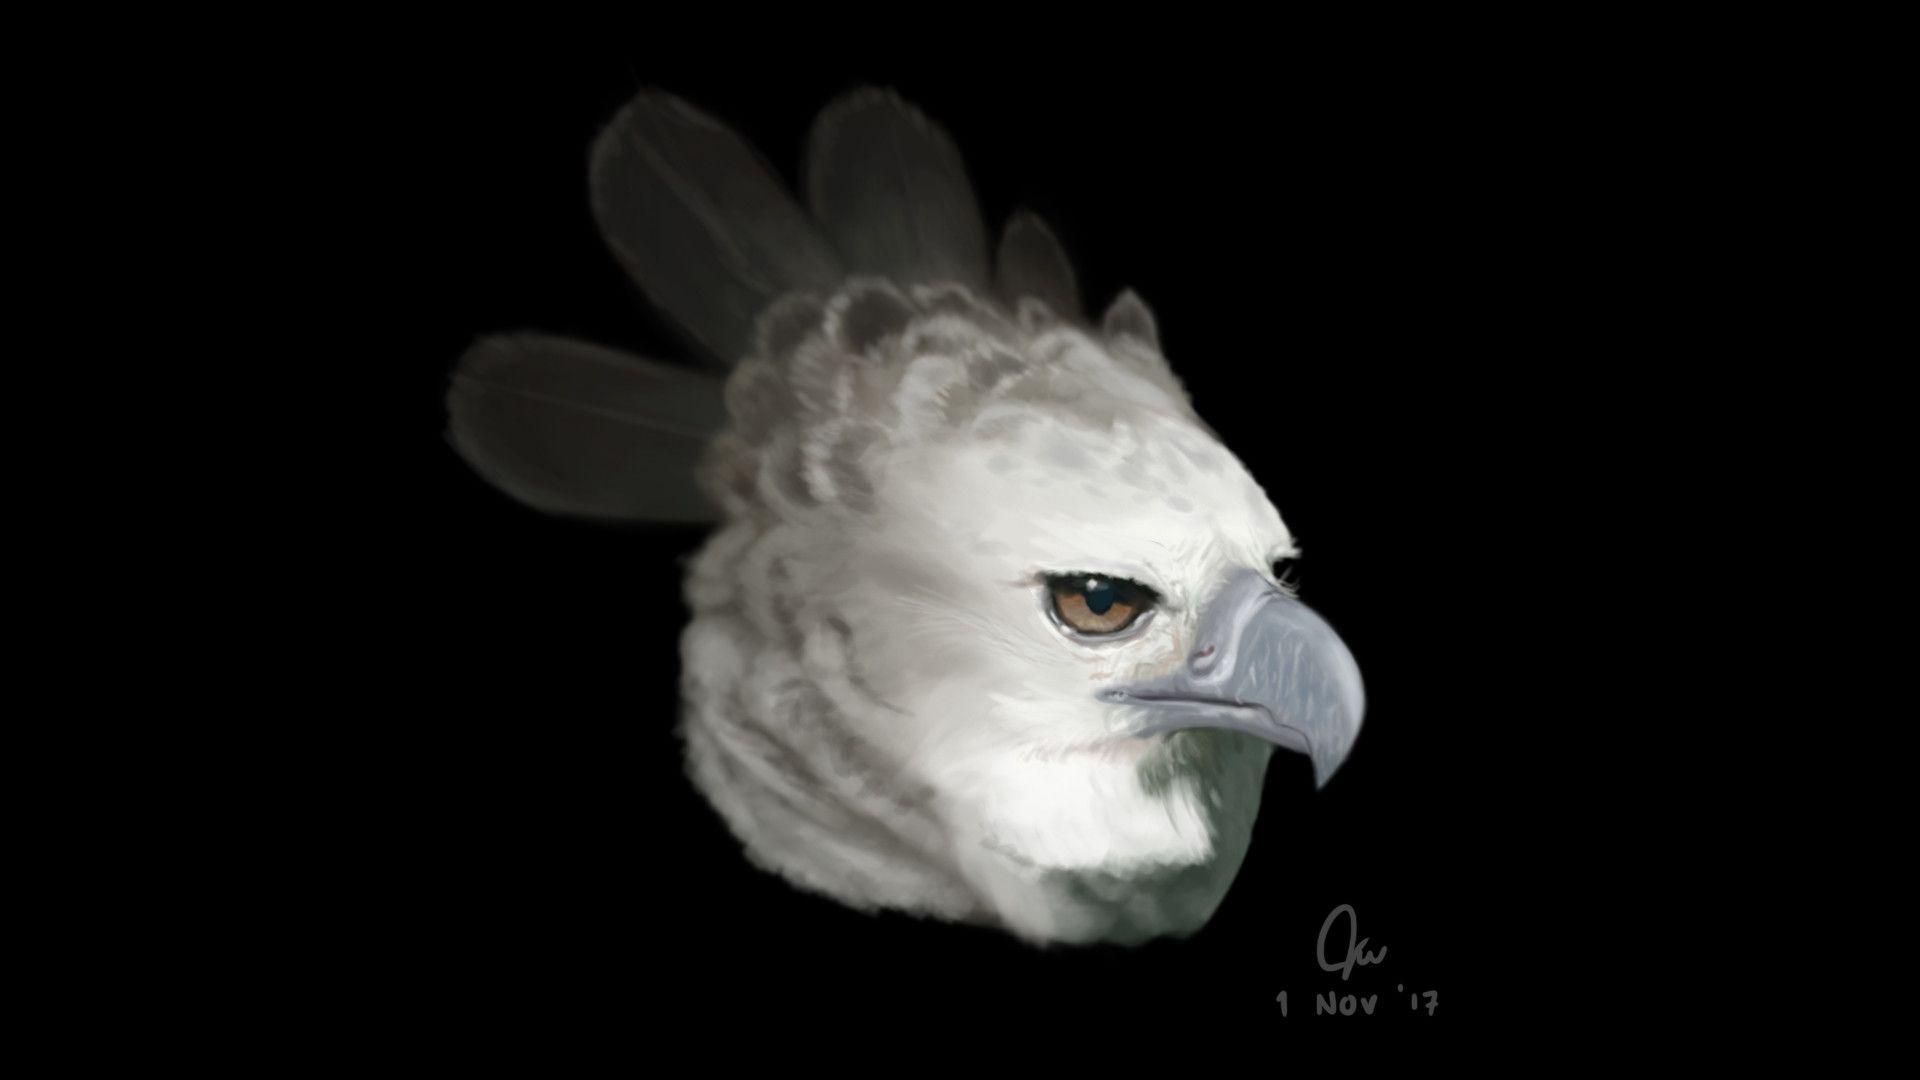 Harpy Eagle Wallpapers Top Free Harpy Eagle Backgrounds Images, Photos, Reviews